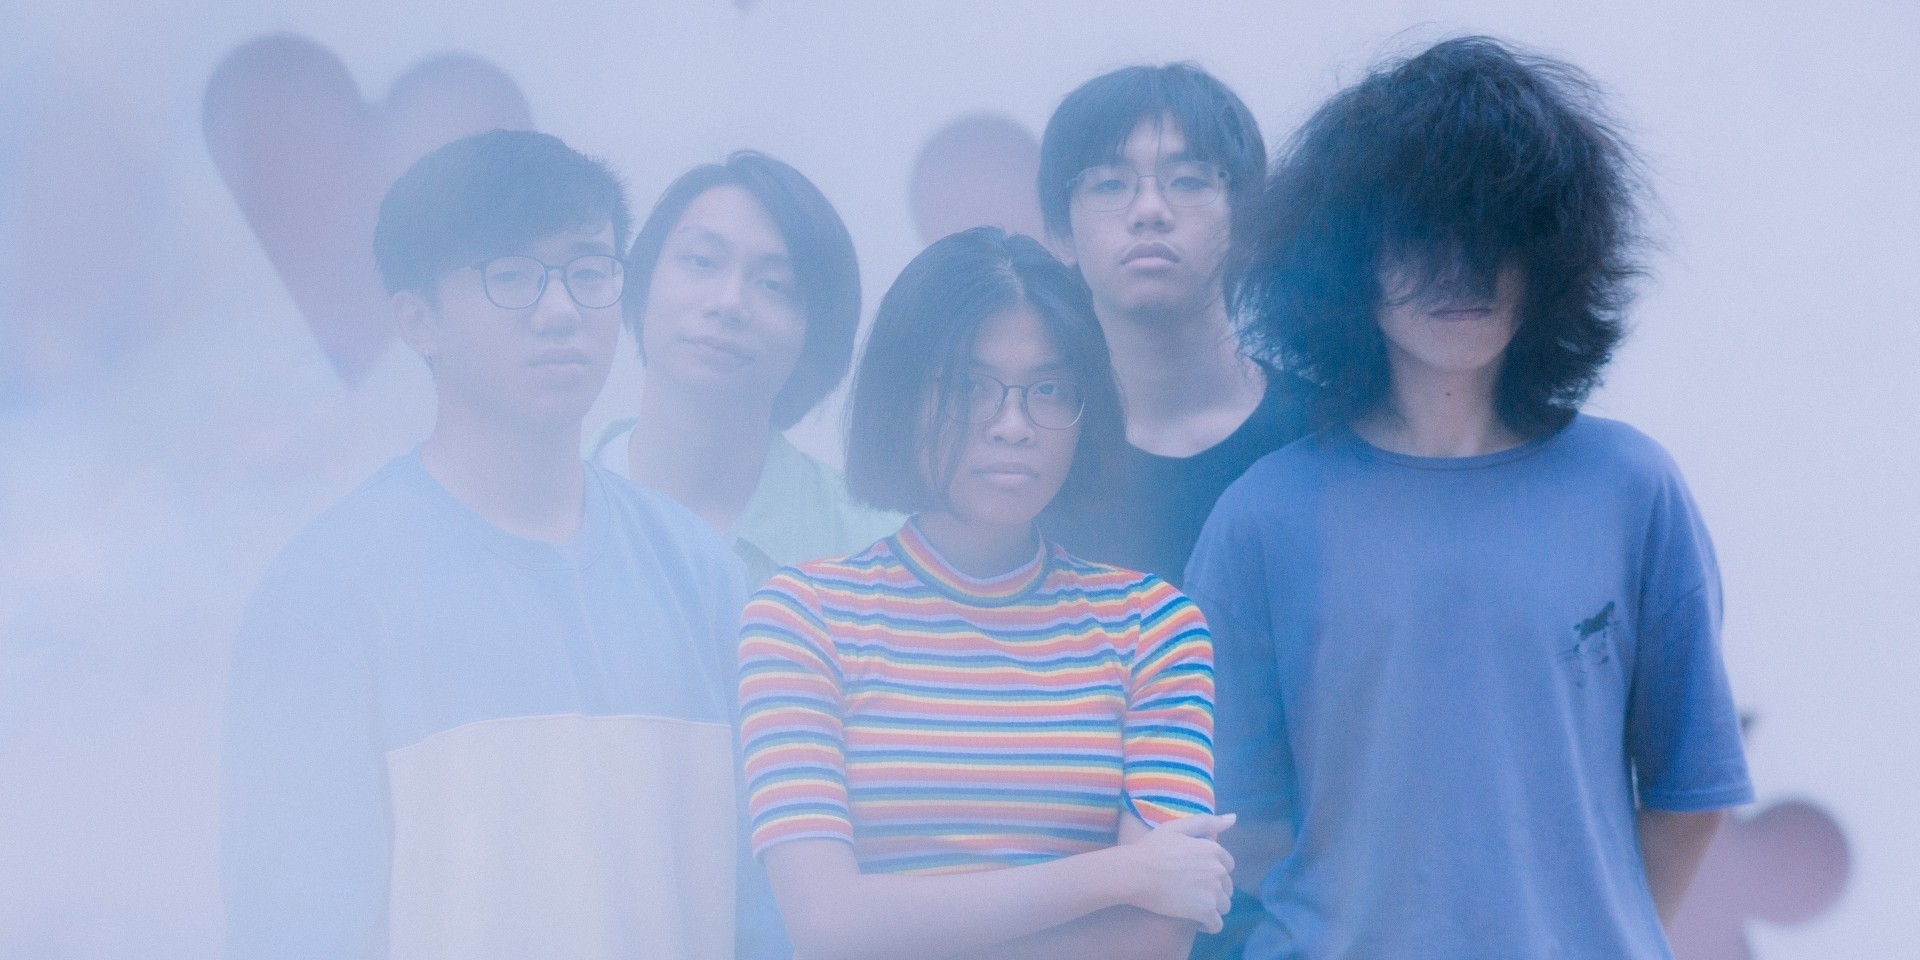 Subsonic Eye releases gorgeous new single 'The Tired Club' - listen